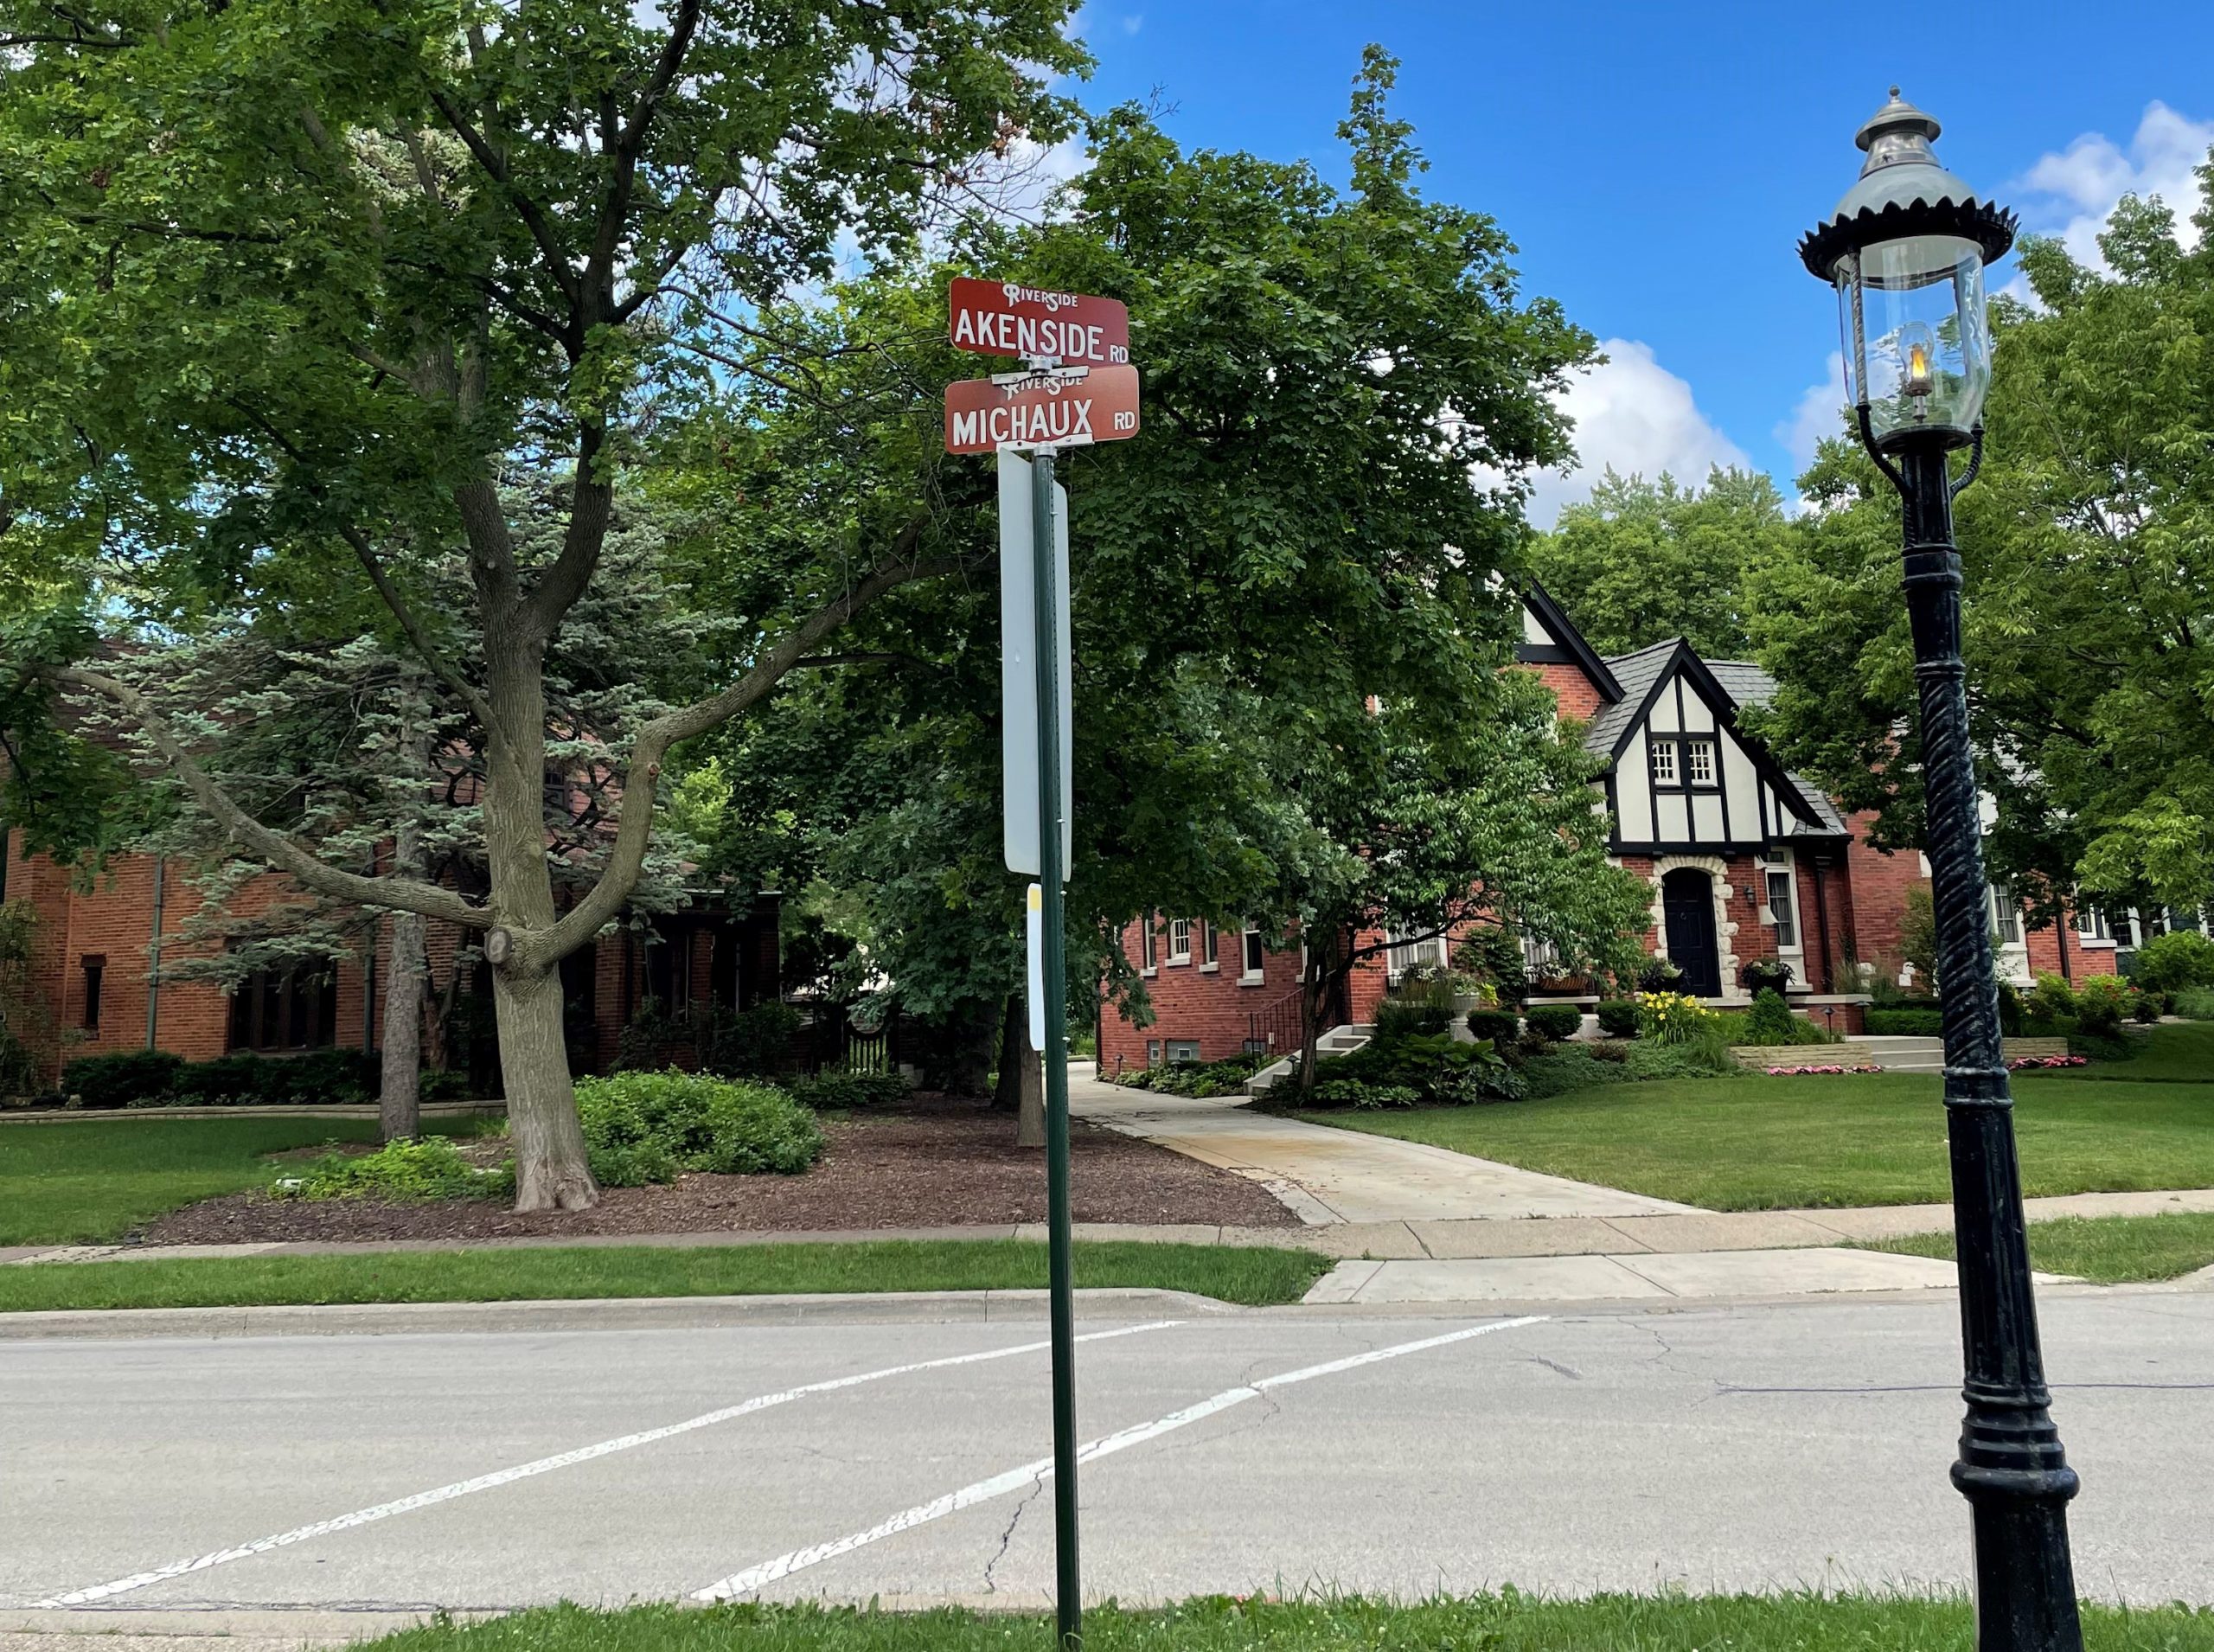 In the foreground, Akenside Road and Michaux Road street signs beside a gas street light. Mature trees and Tudor-style house are in the background.  